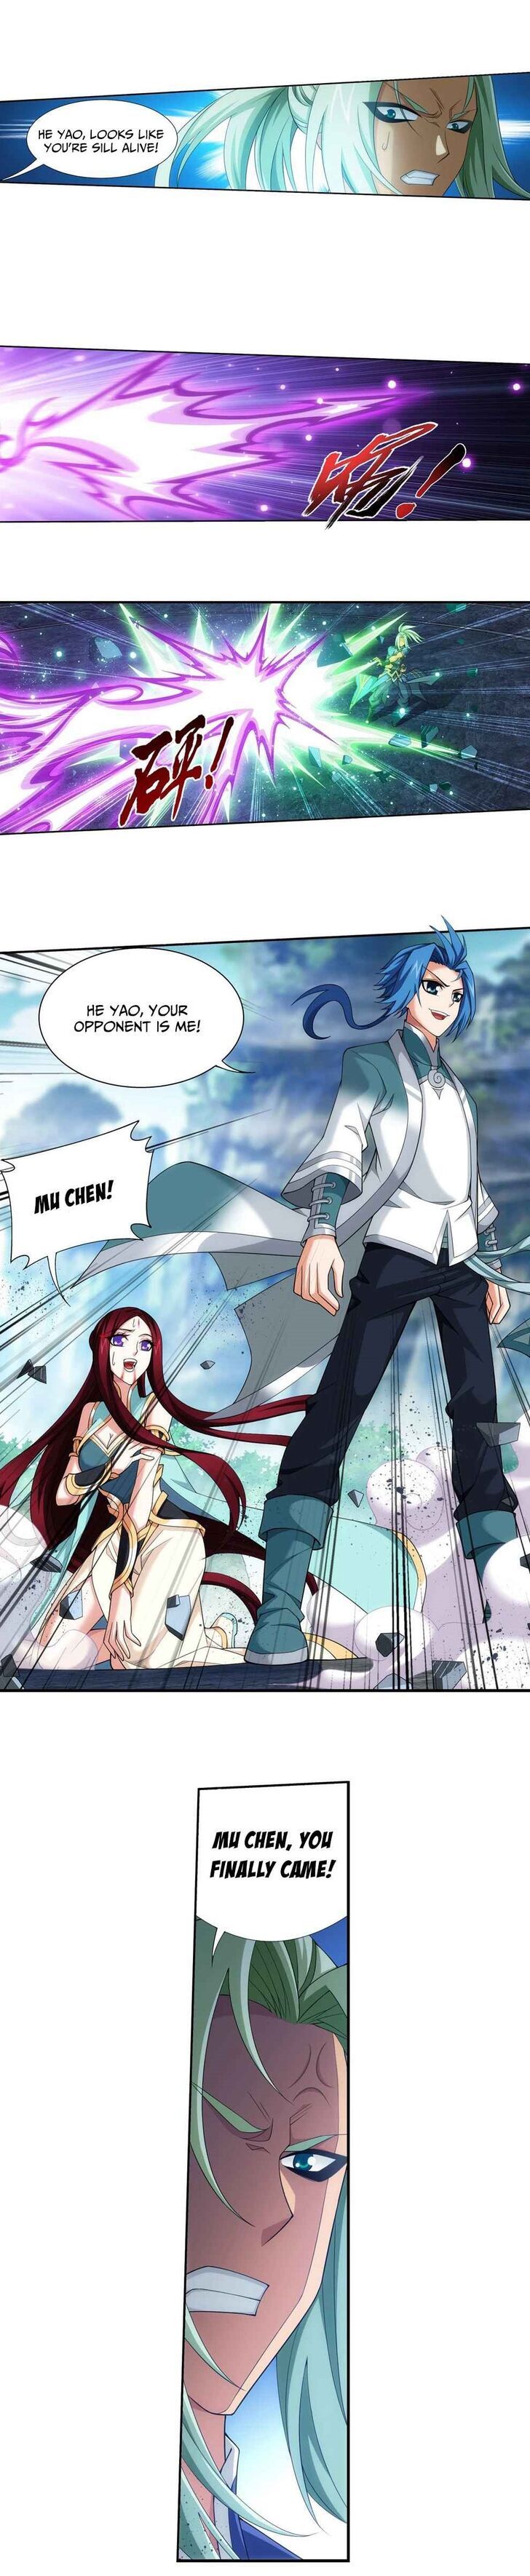 The Great Ruler Chapter 147.2 page 5